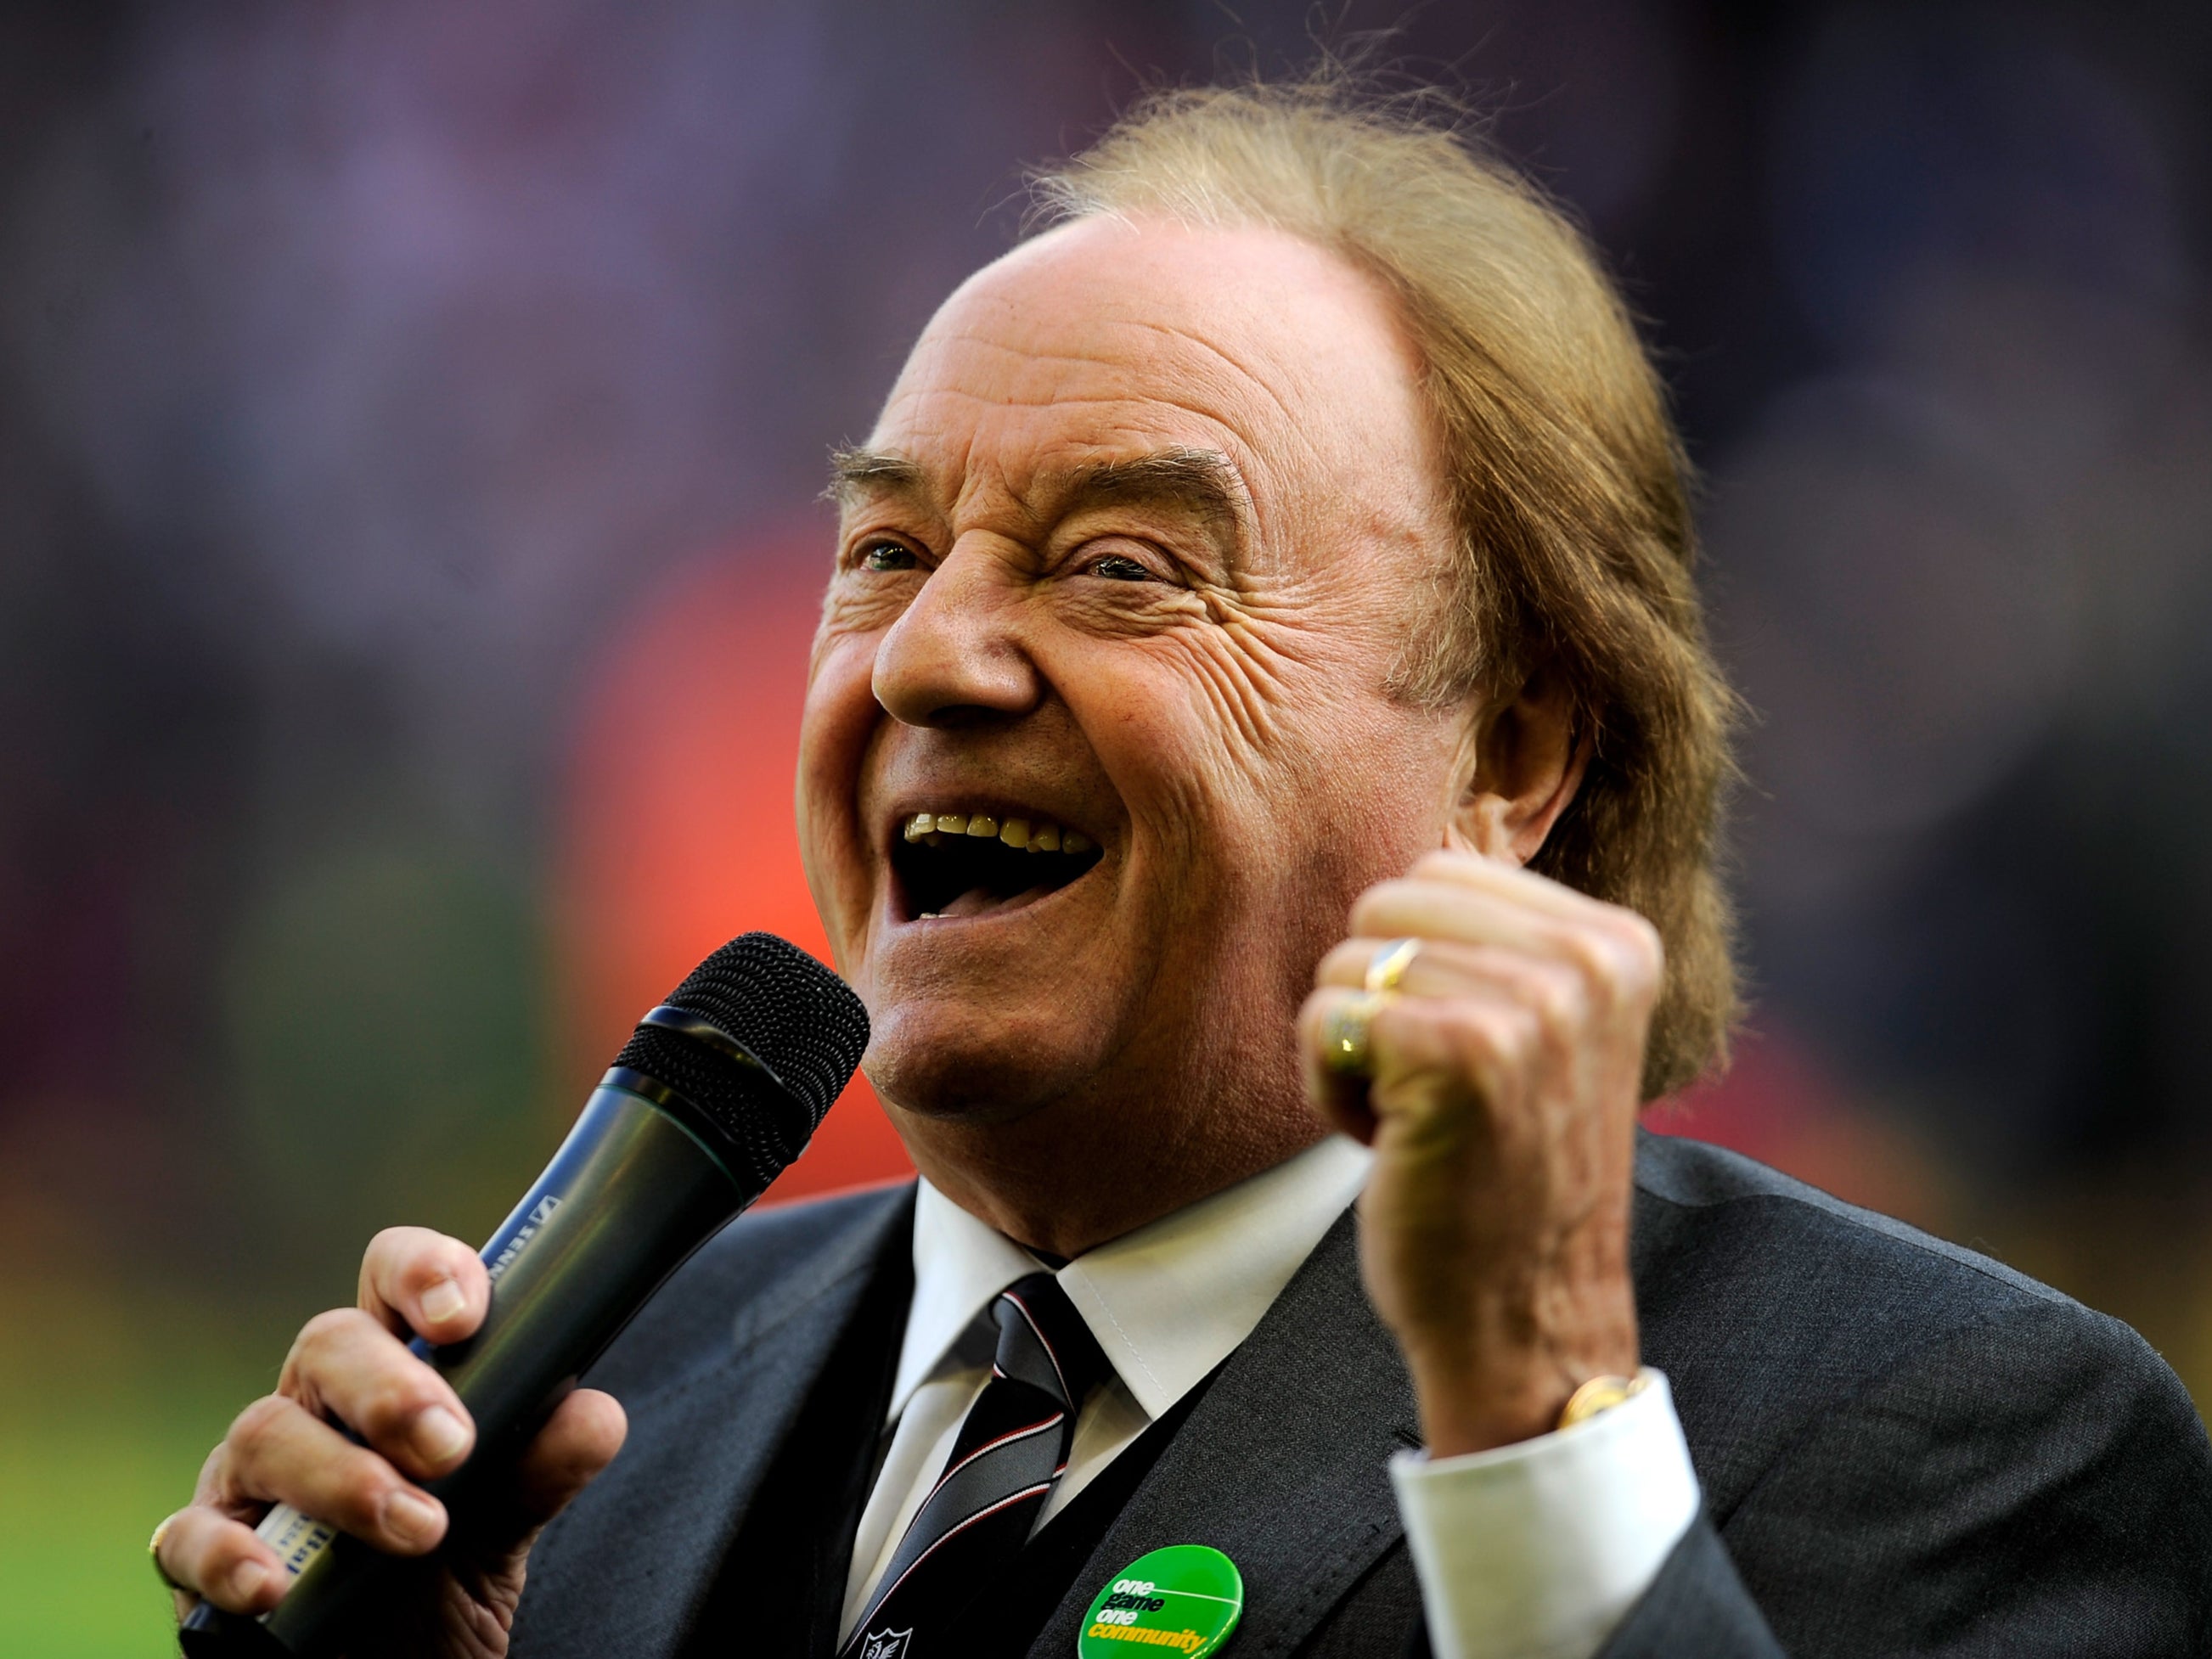 Gerry Marsden sings prior to the Barclays Premier League match between Liverpool and Blackburn Rovers at Anfield on 25 October 2010&nbsp;